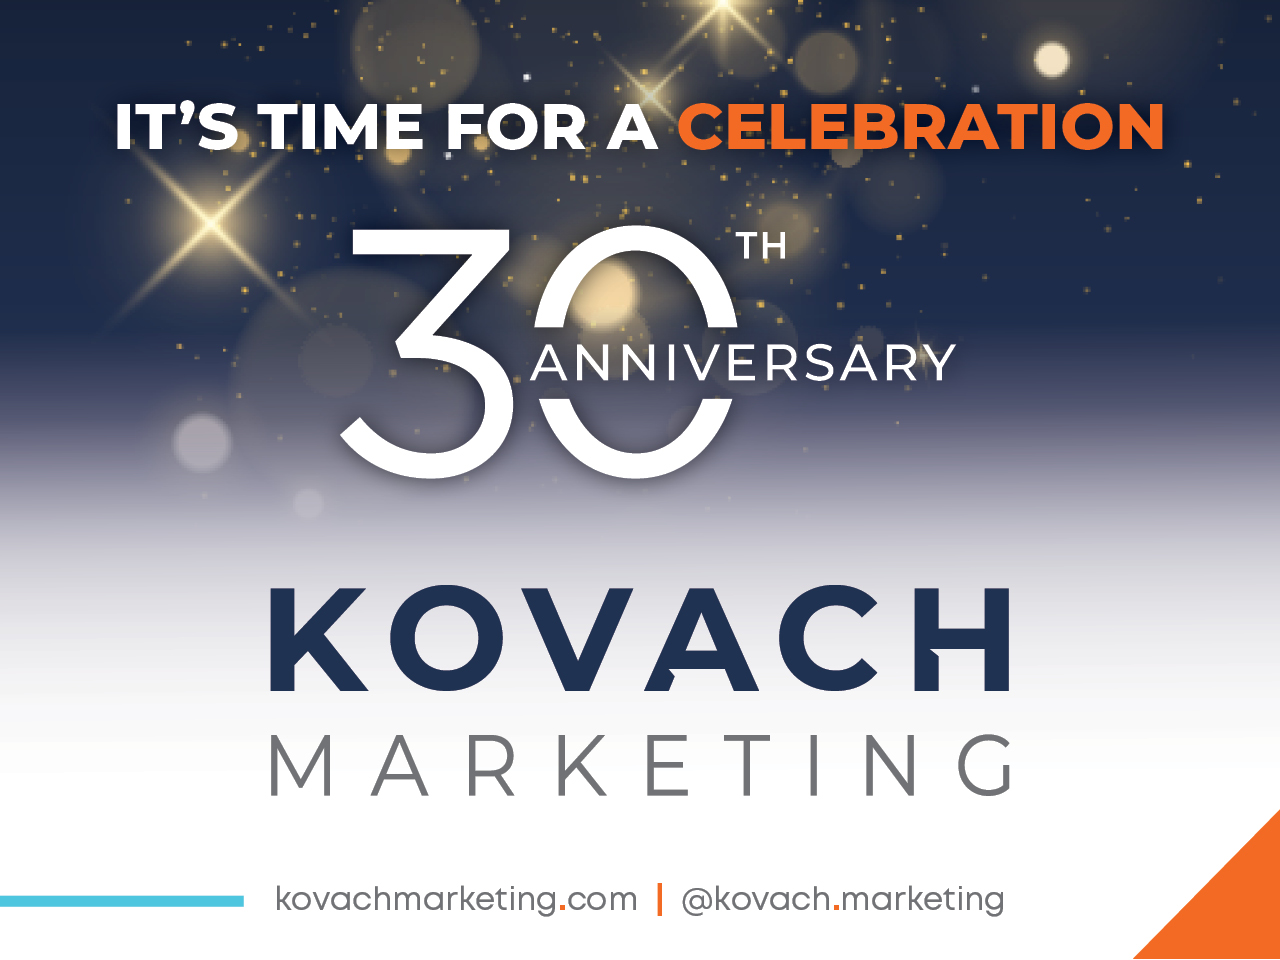 KOVACH MARKETING CELEBRATES 30 YEARS SERVING THE  HOMEBUILDING AND REAL ESTATE INDUSTRIES